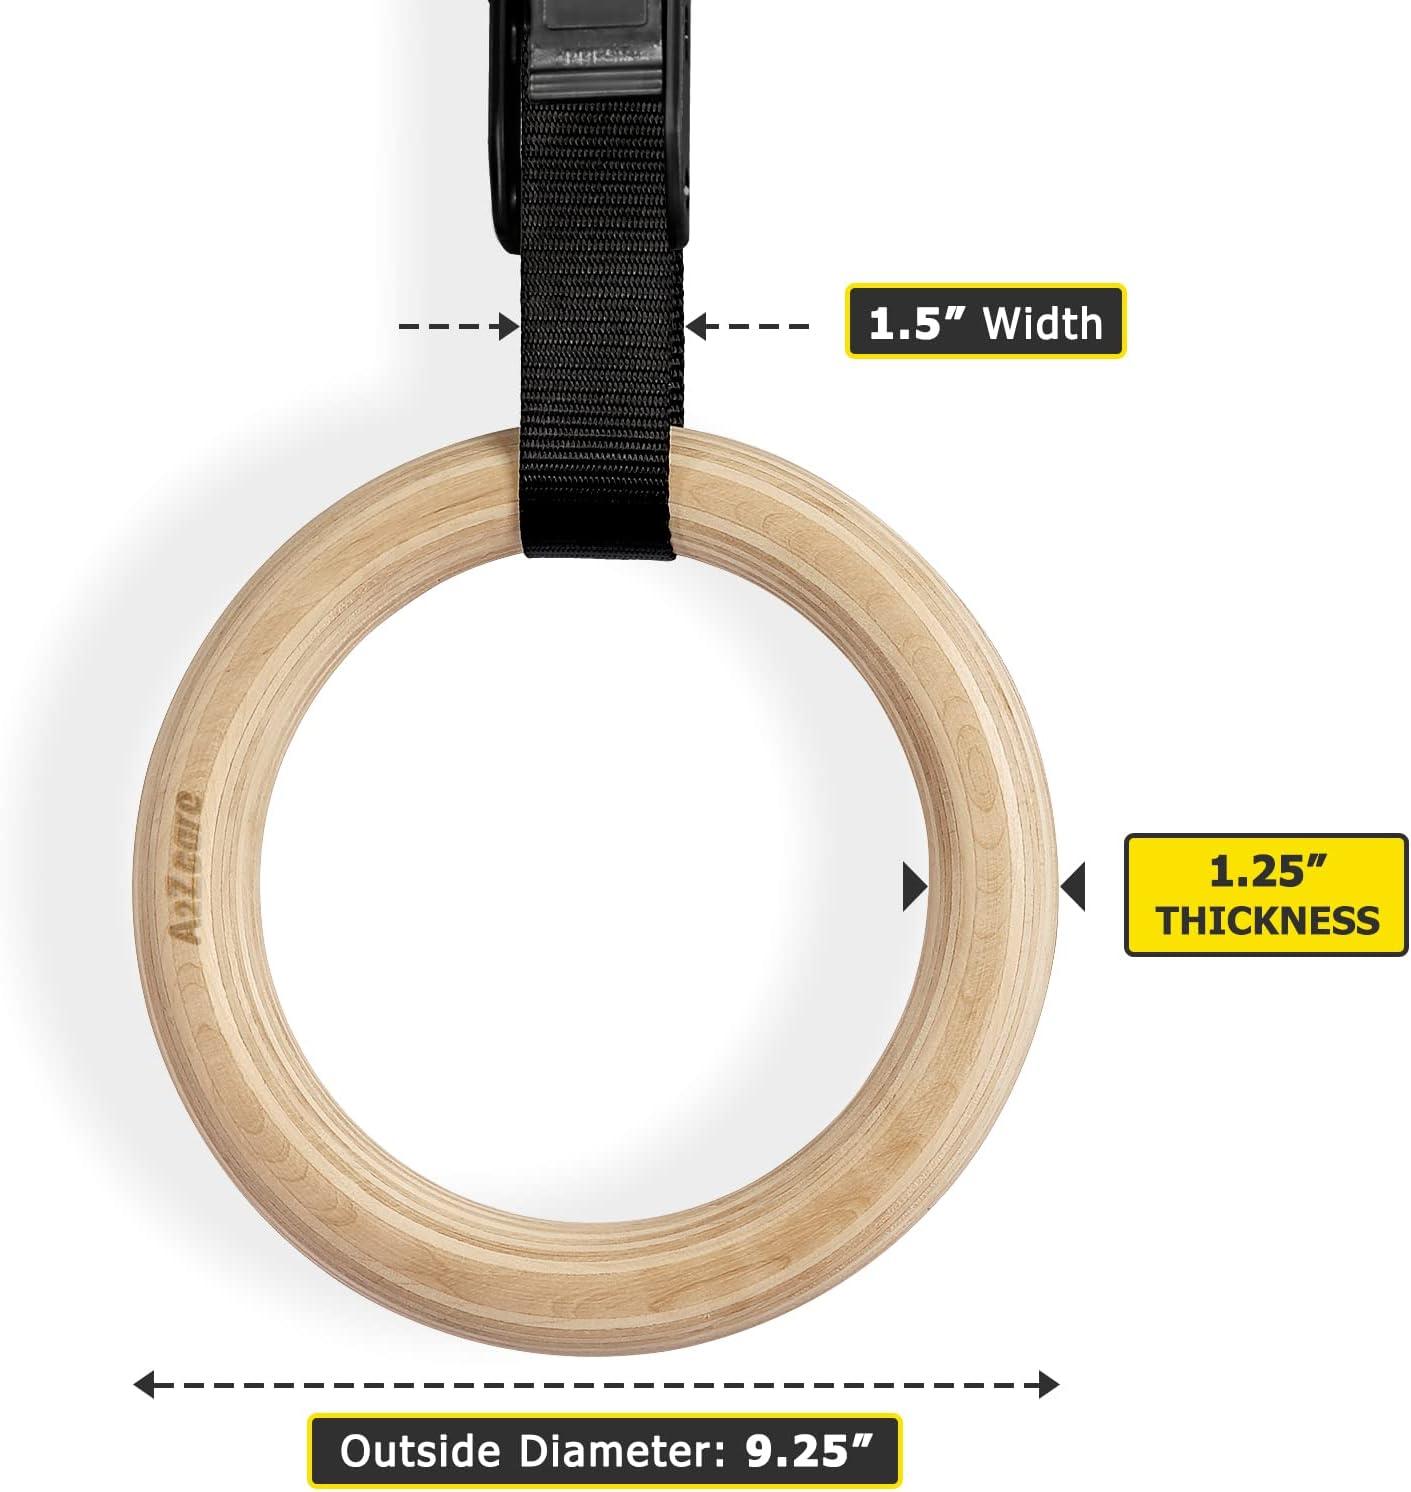 Buy IRIS Fitness Wooden Gymnastic Rings,Olympic Gym Rings with Heavy Duty  1.5